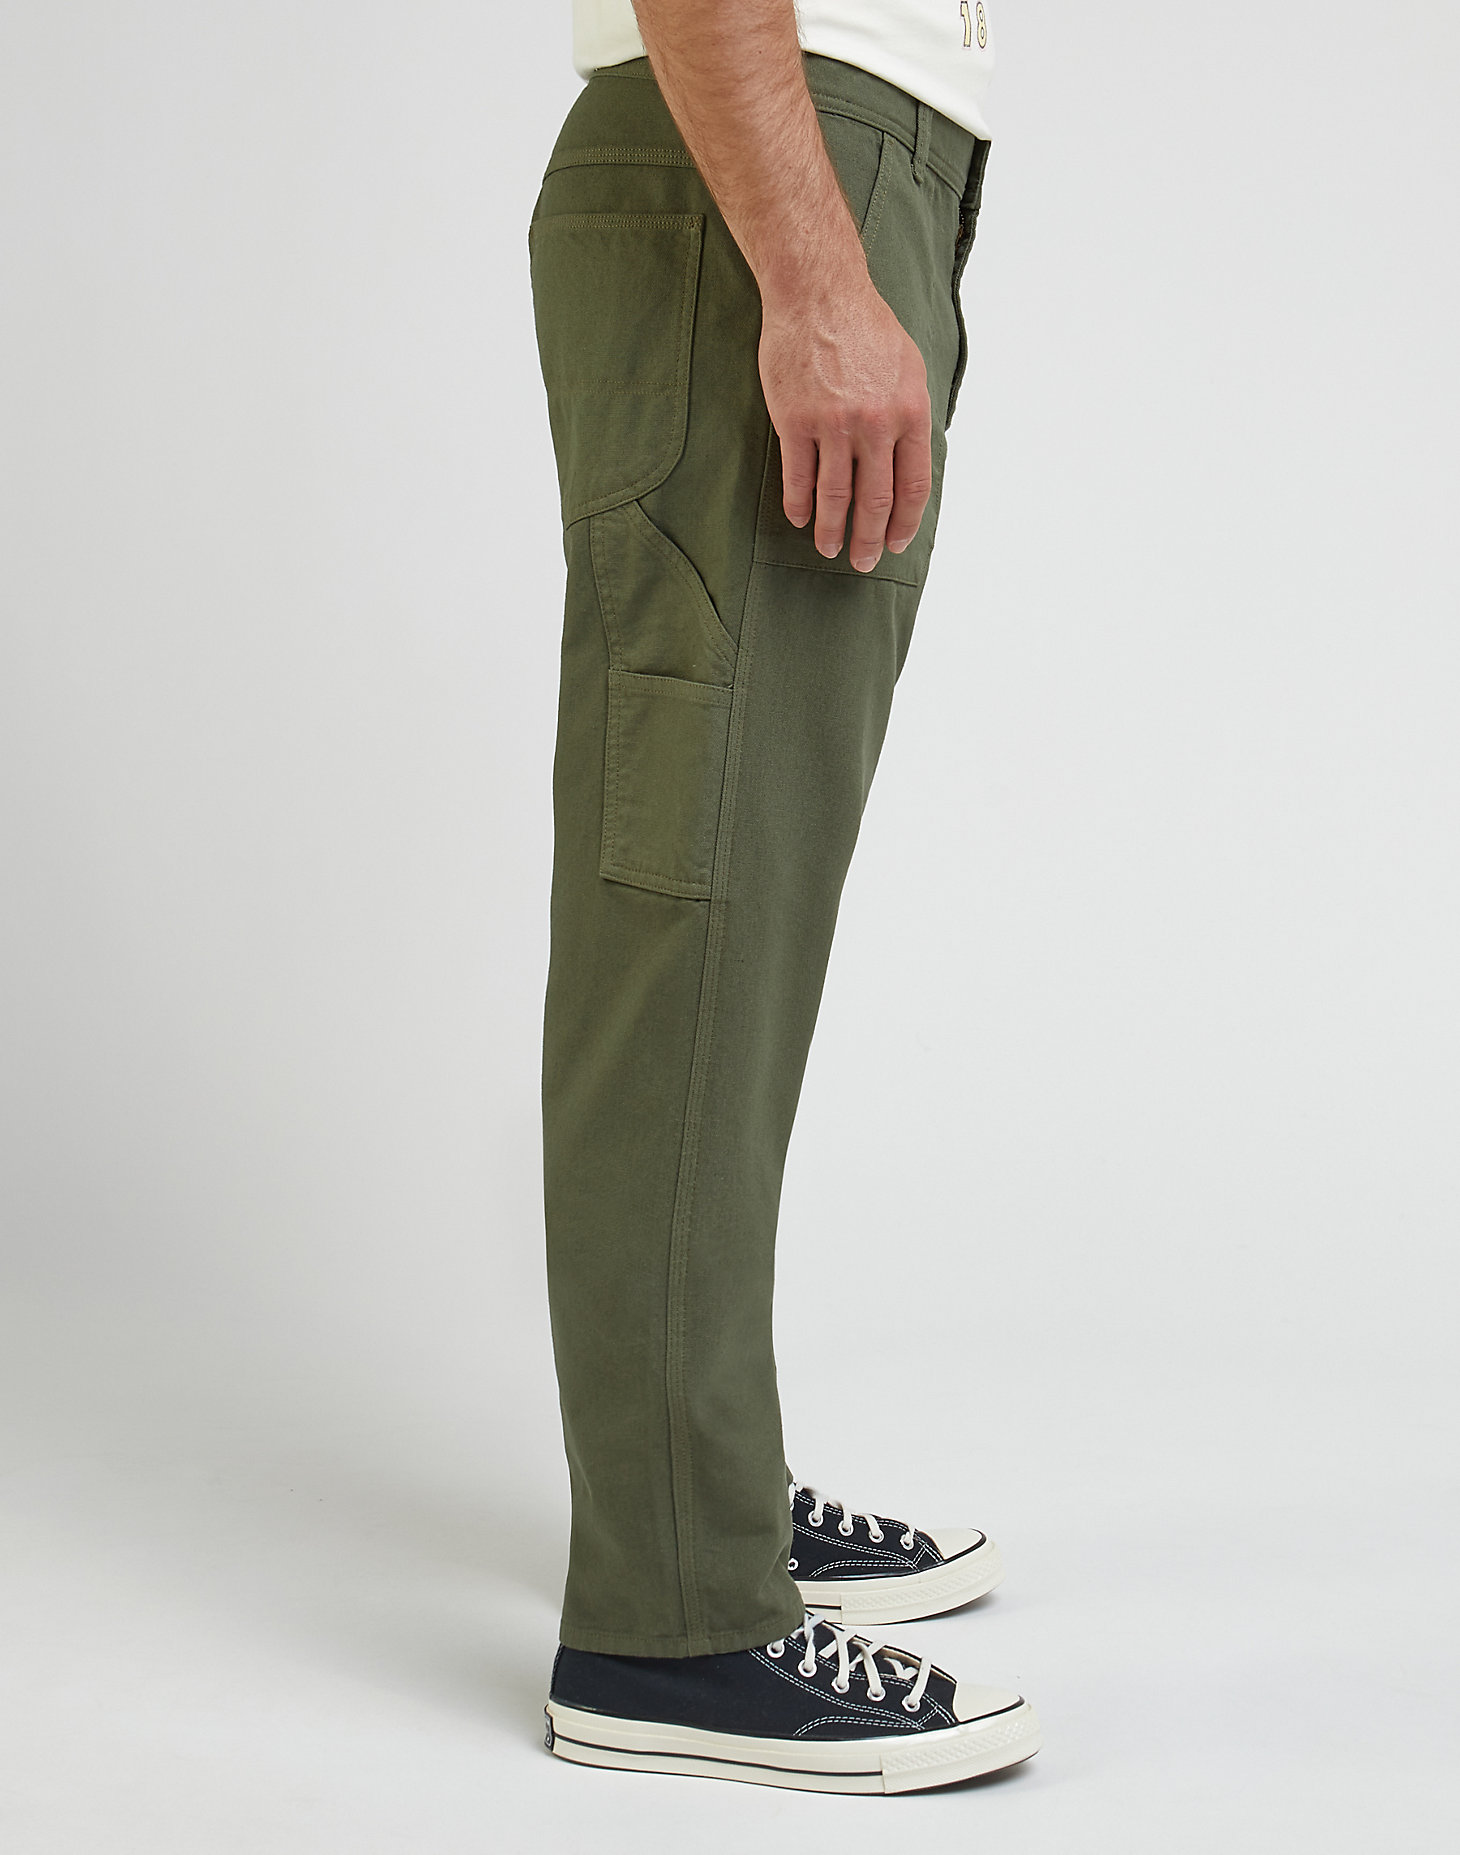 The Fatigue Pants in Olive Grove alternative view 3